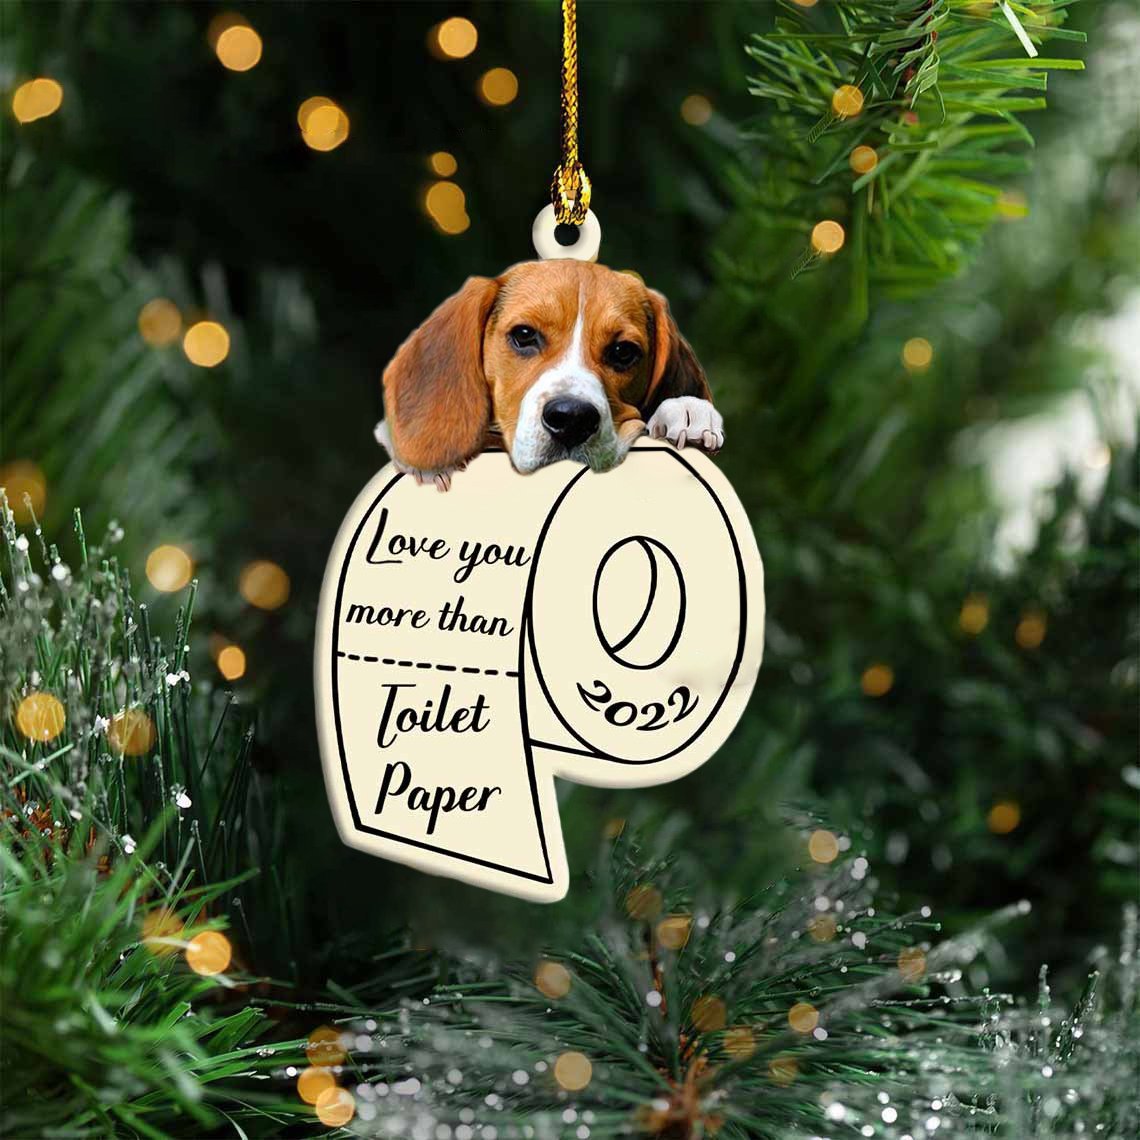 Beagle Love You More Than Toilet Paper 2022 Hanging Ornament